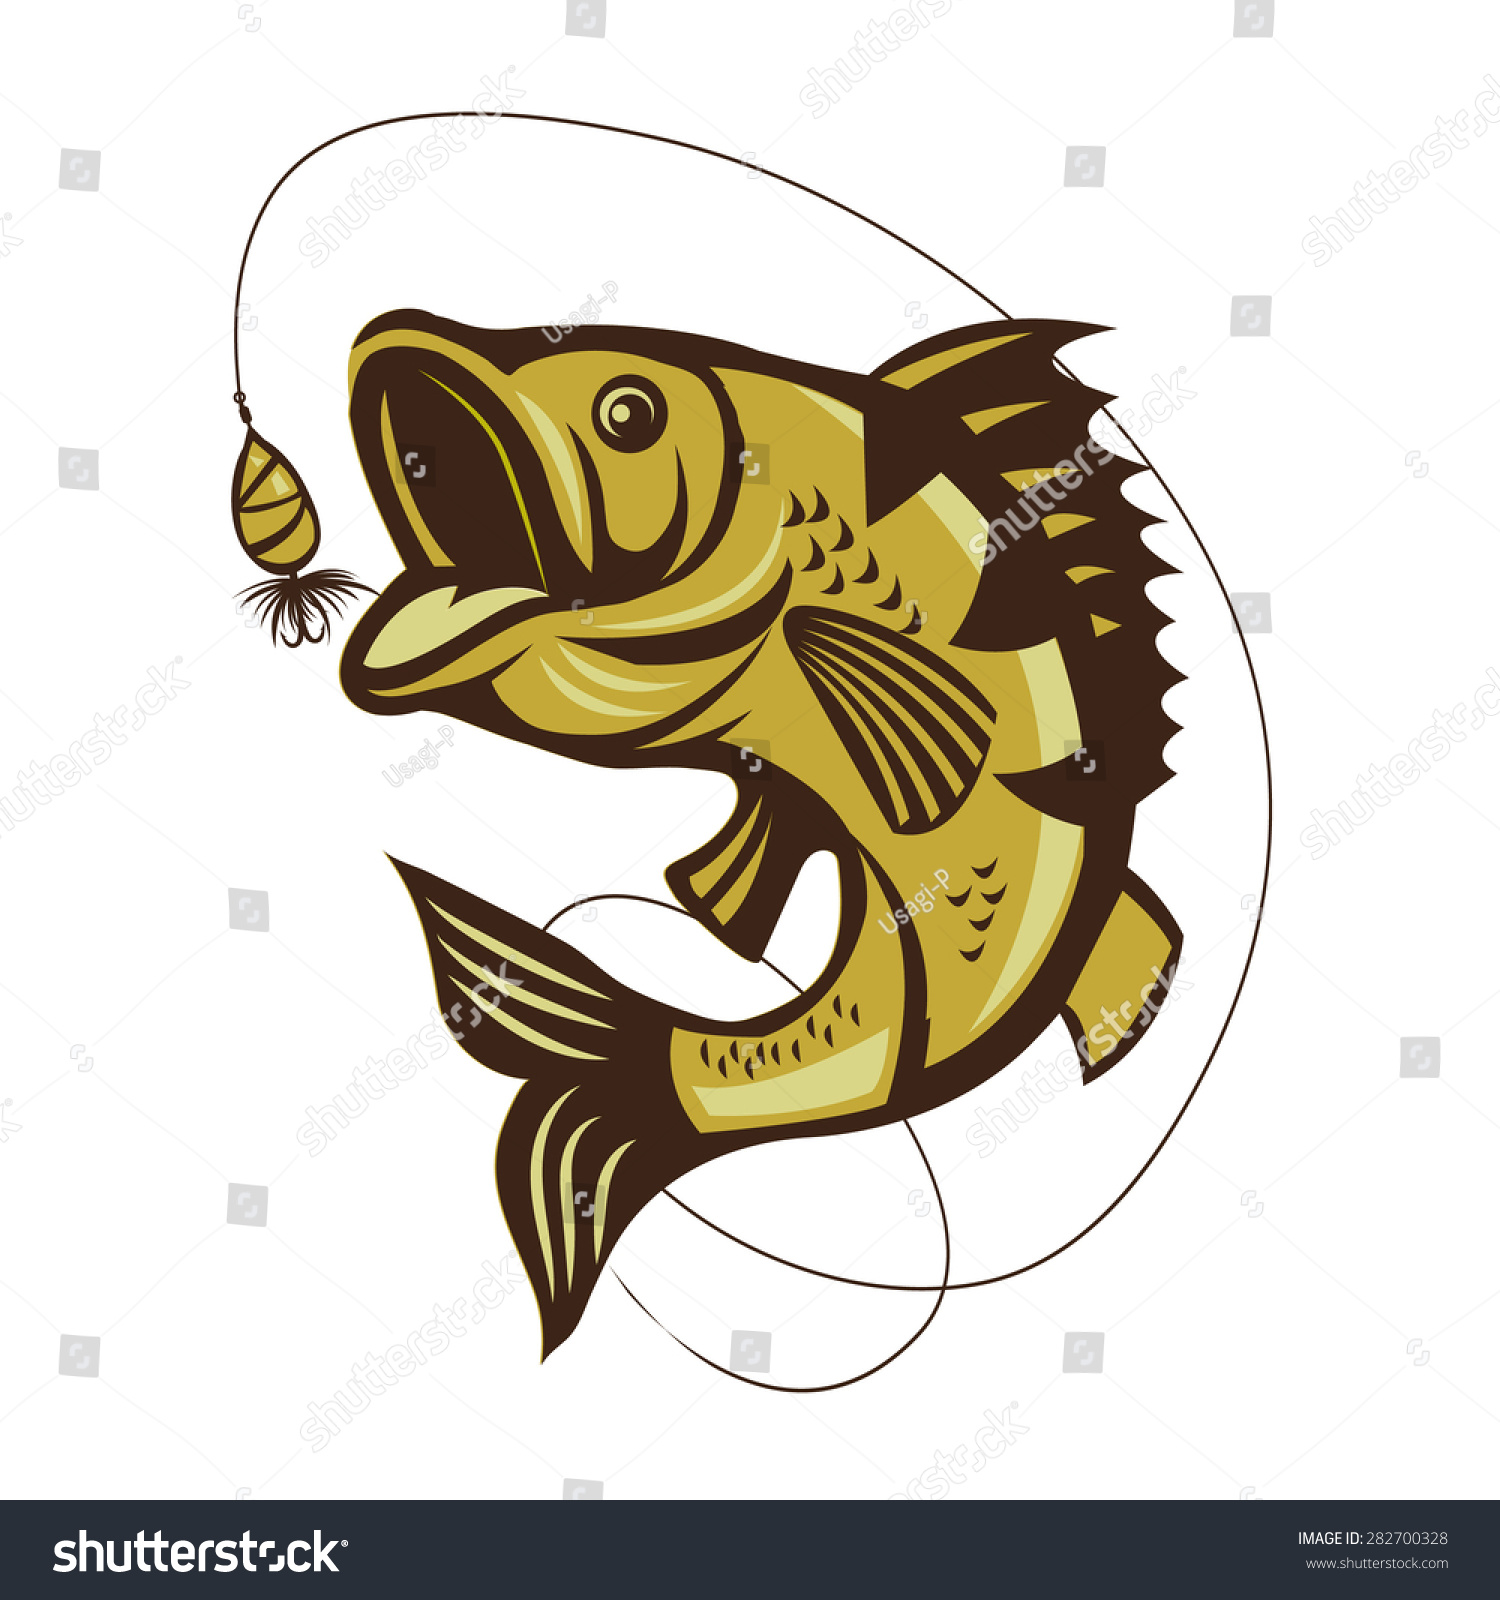 clipart catching a fish - photo #31